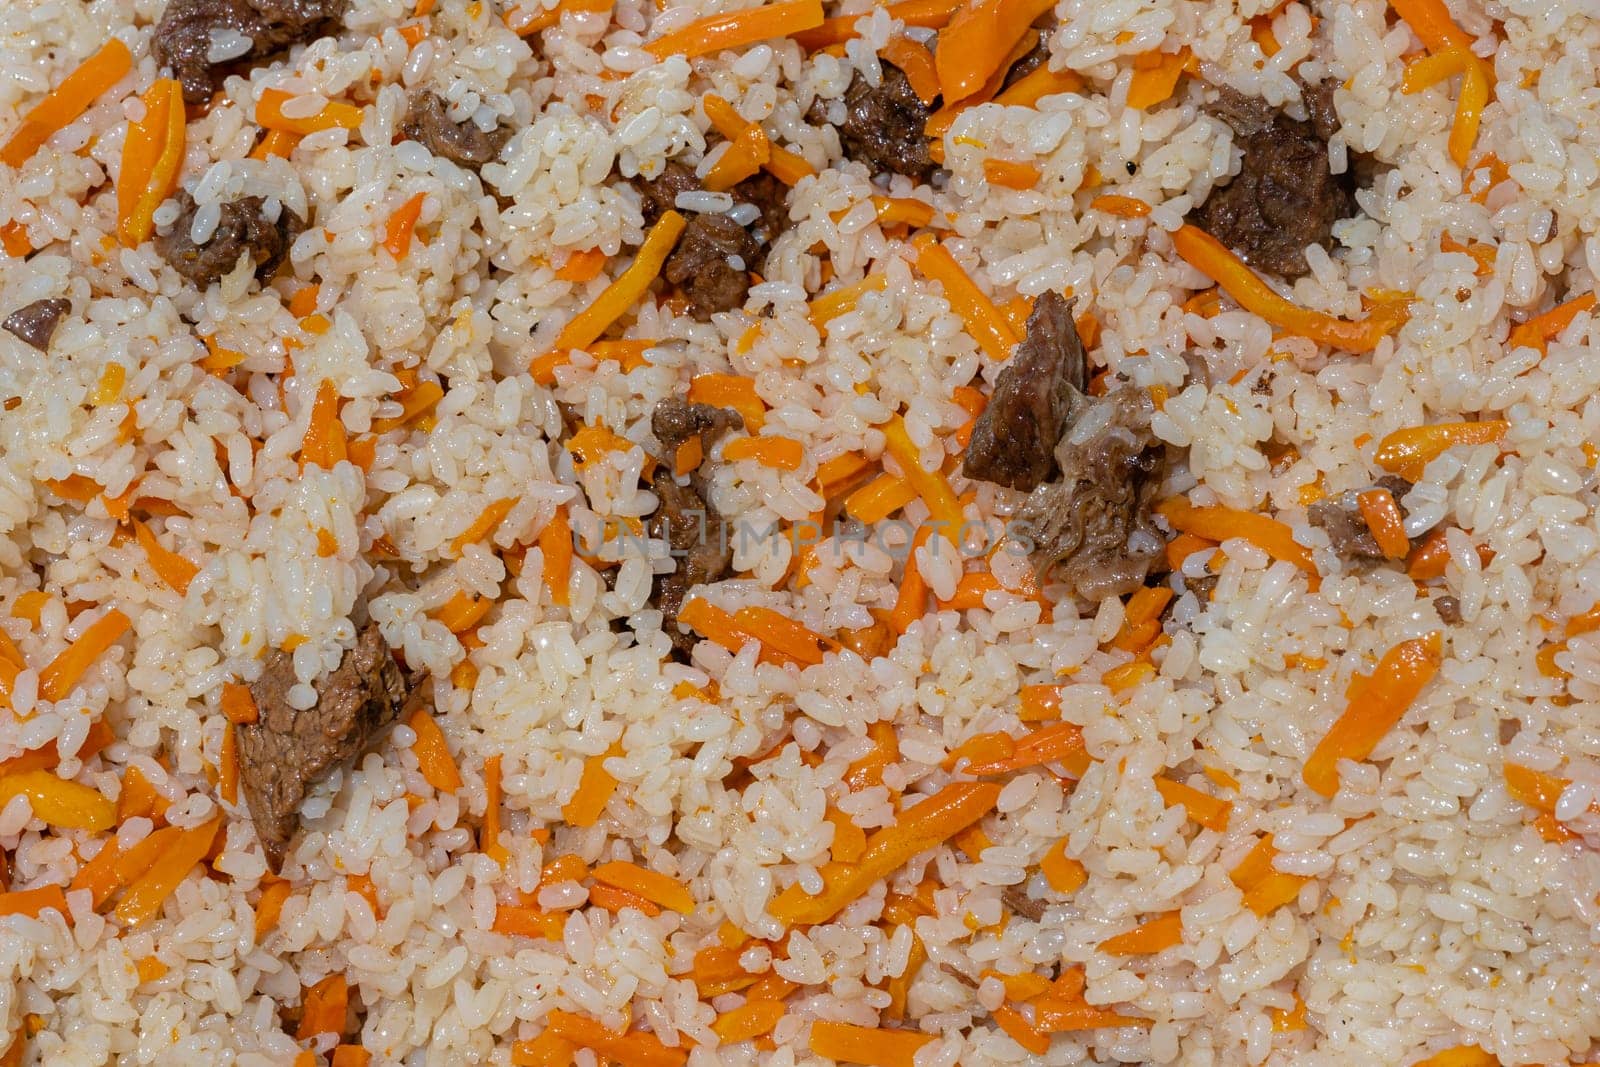 Close-up view of Asian tasty food background. Traditional Eastern culinary dish - pilaf. Ingredients: rice with slices of meat, fat and vegetables carrot, garlic, spices - popular recipe.